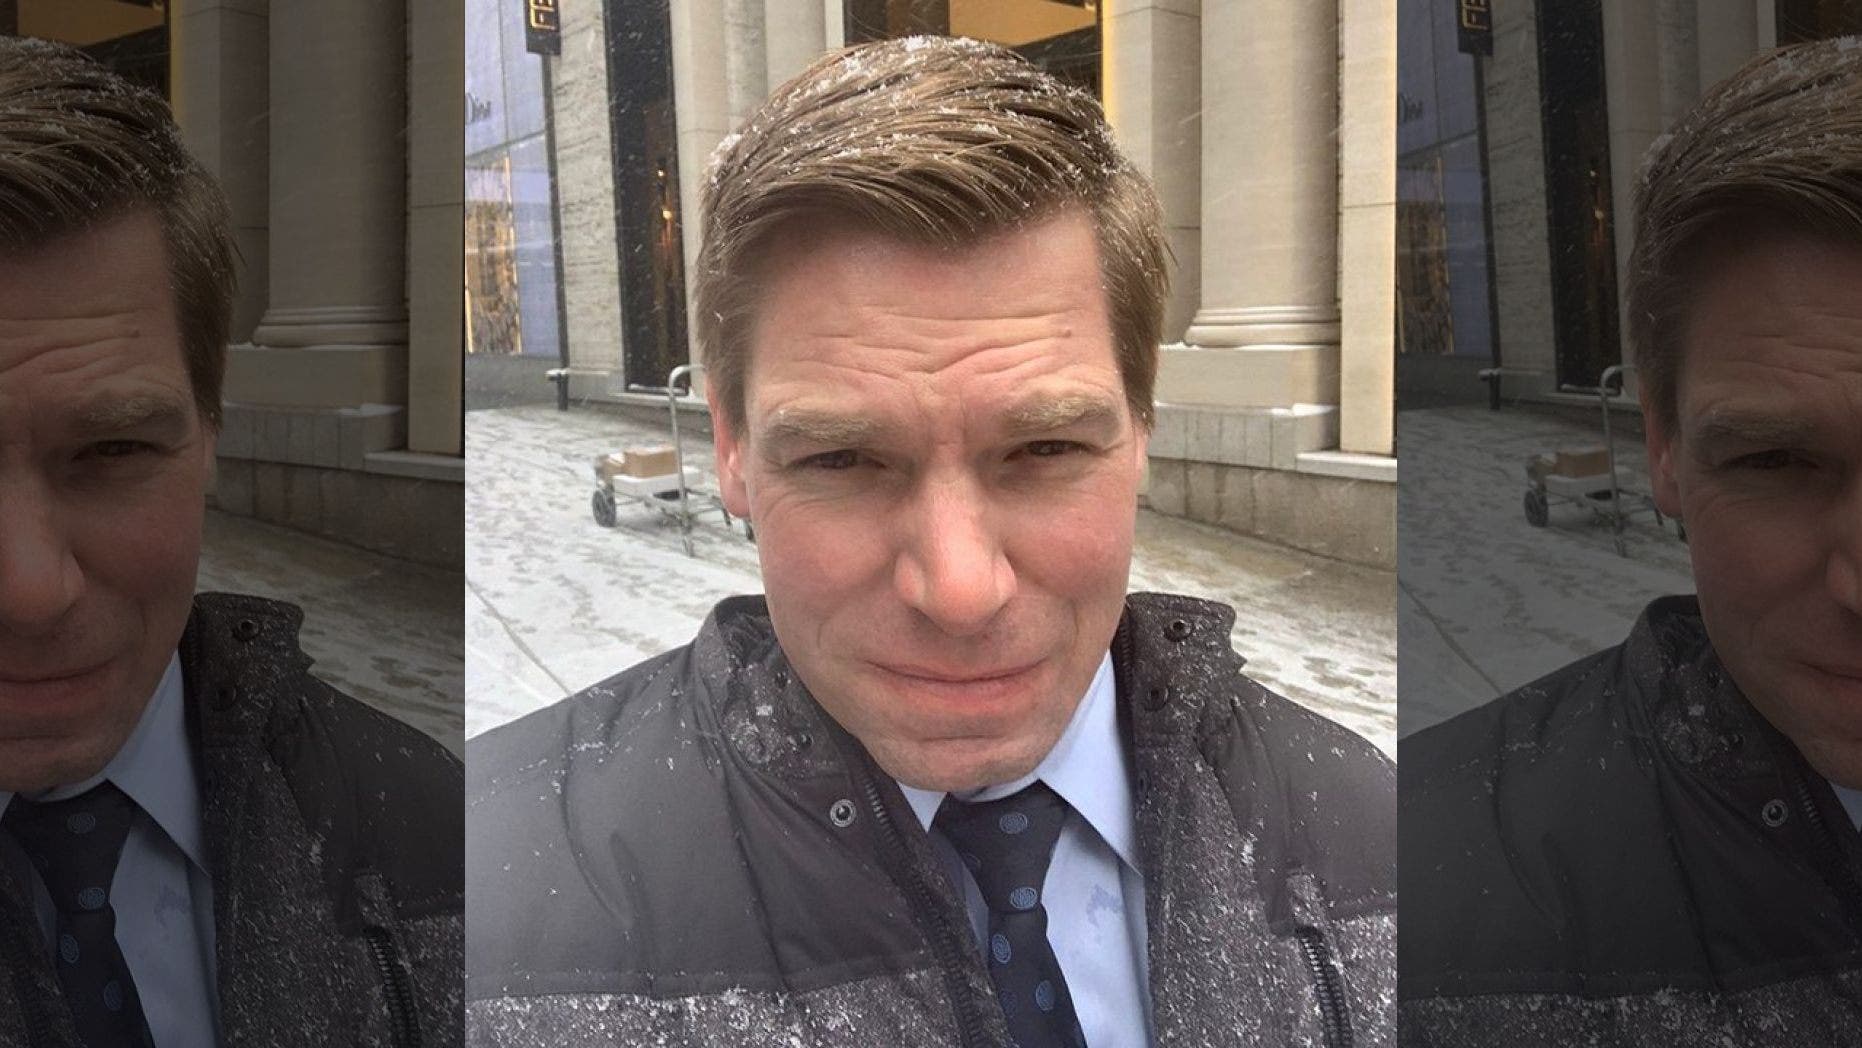 Eric Swalwell’s campaign dropped nearly $60K on travel in six weeks, including hotels in Miami and Paris